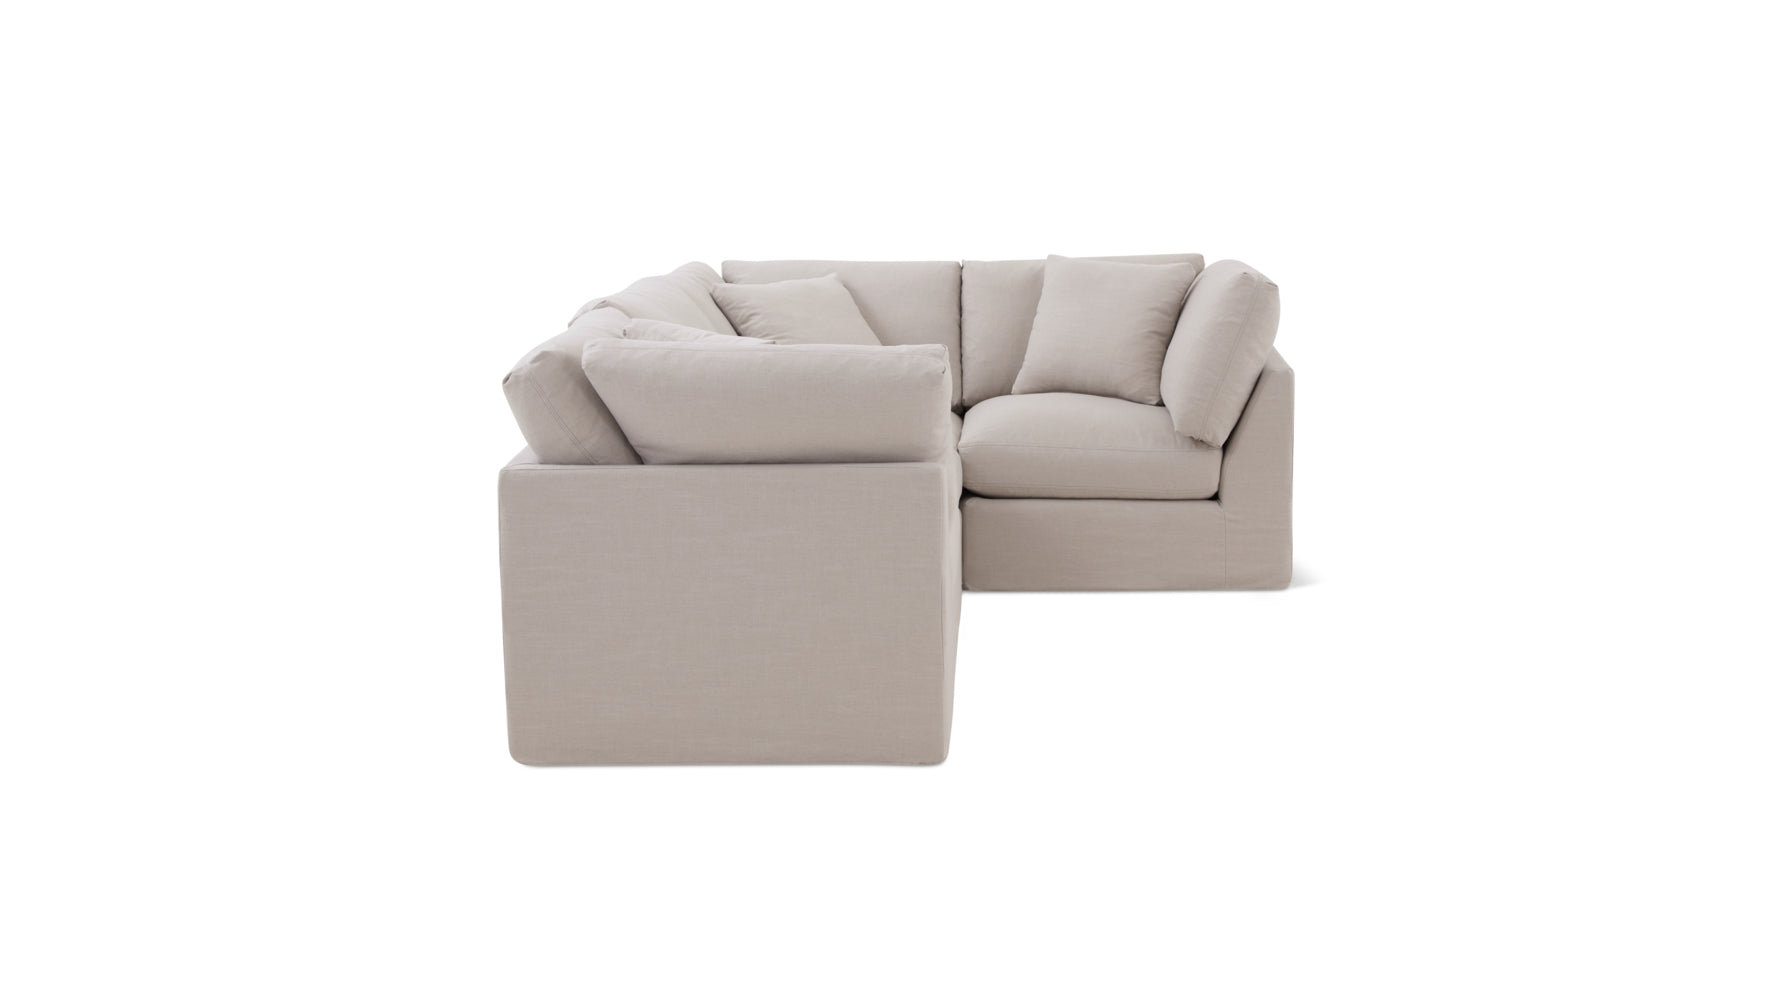 Get Together™ 4-Piece Modular Sectional Closed, Standard, Clay - Image 5